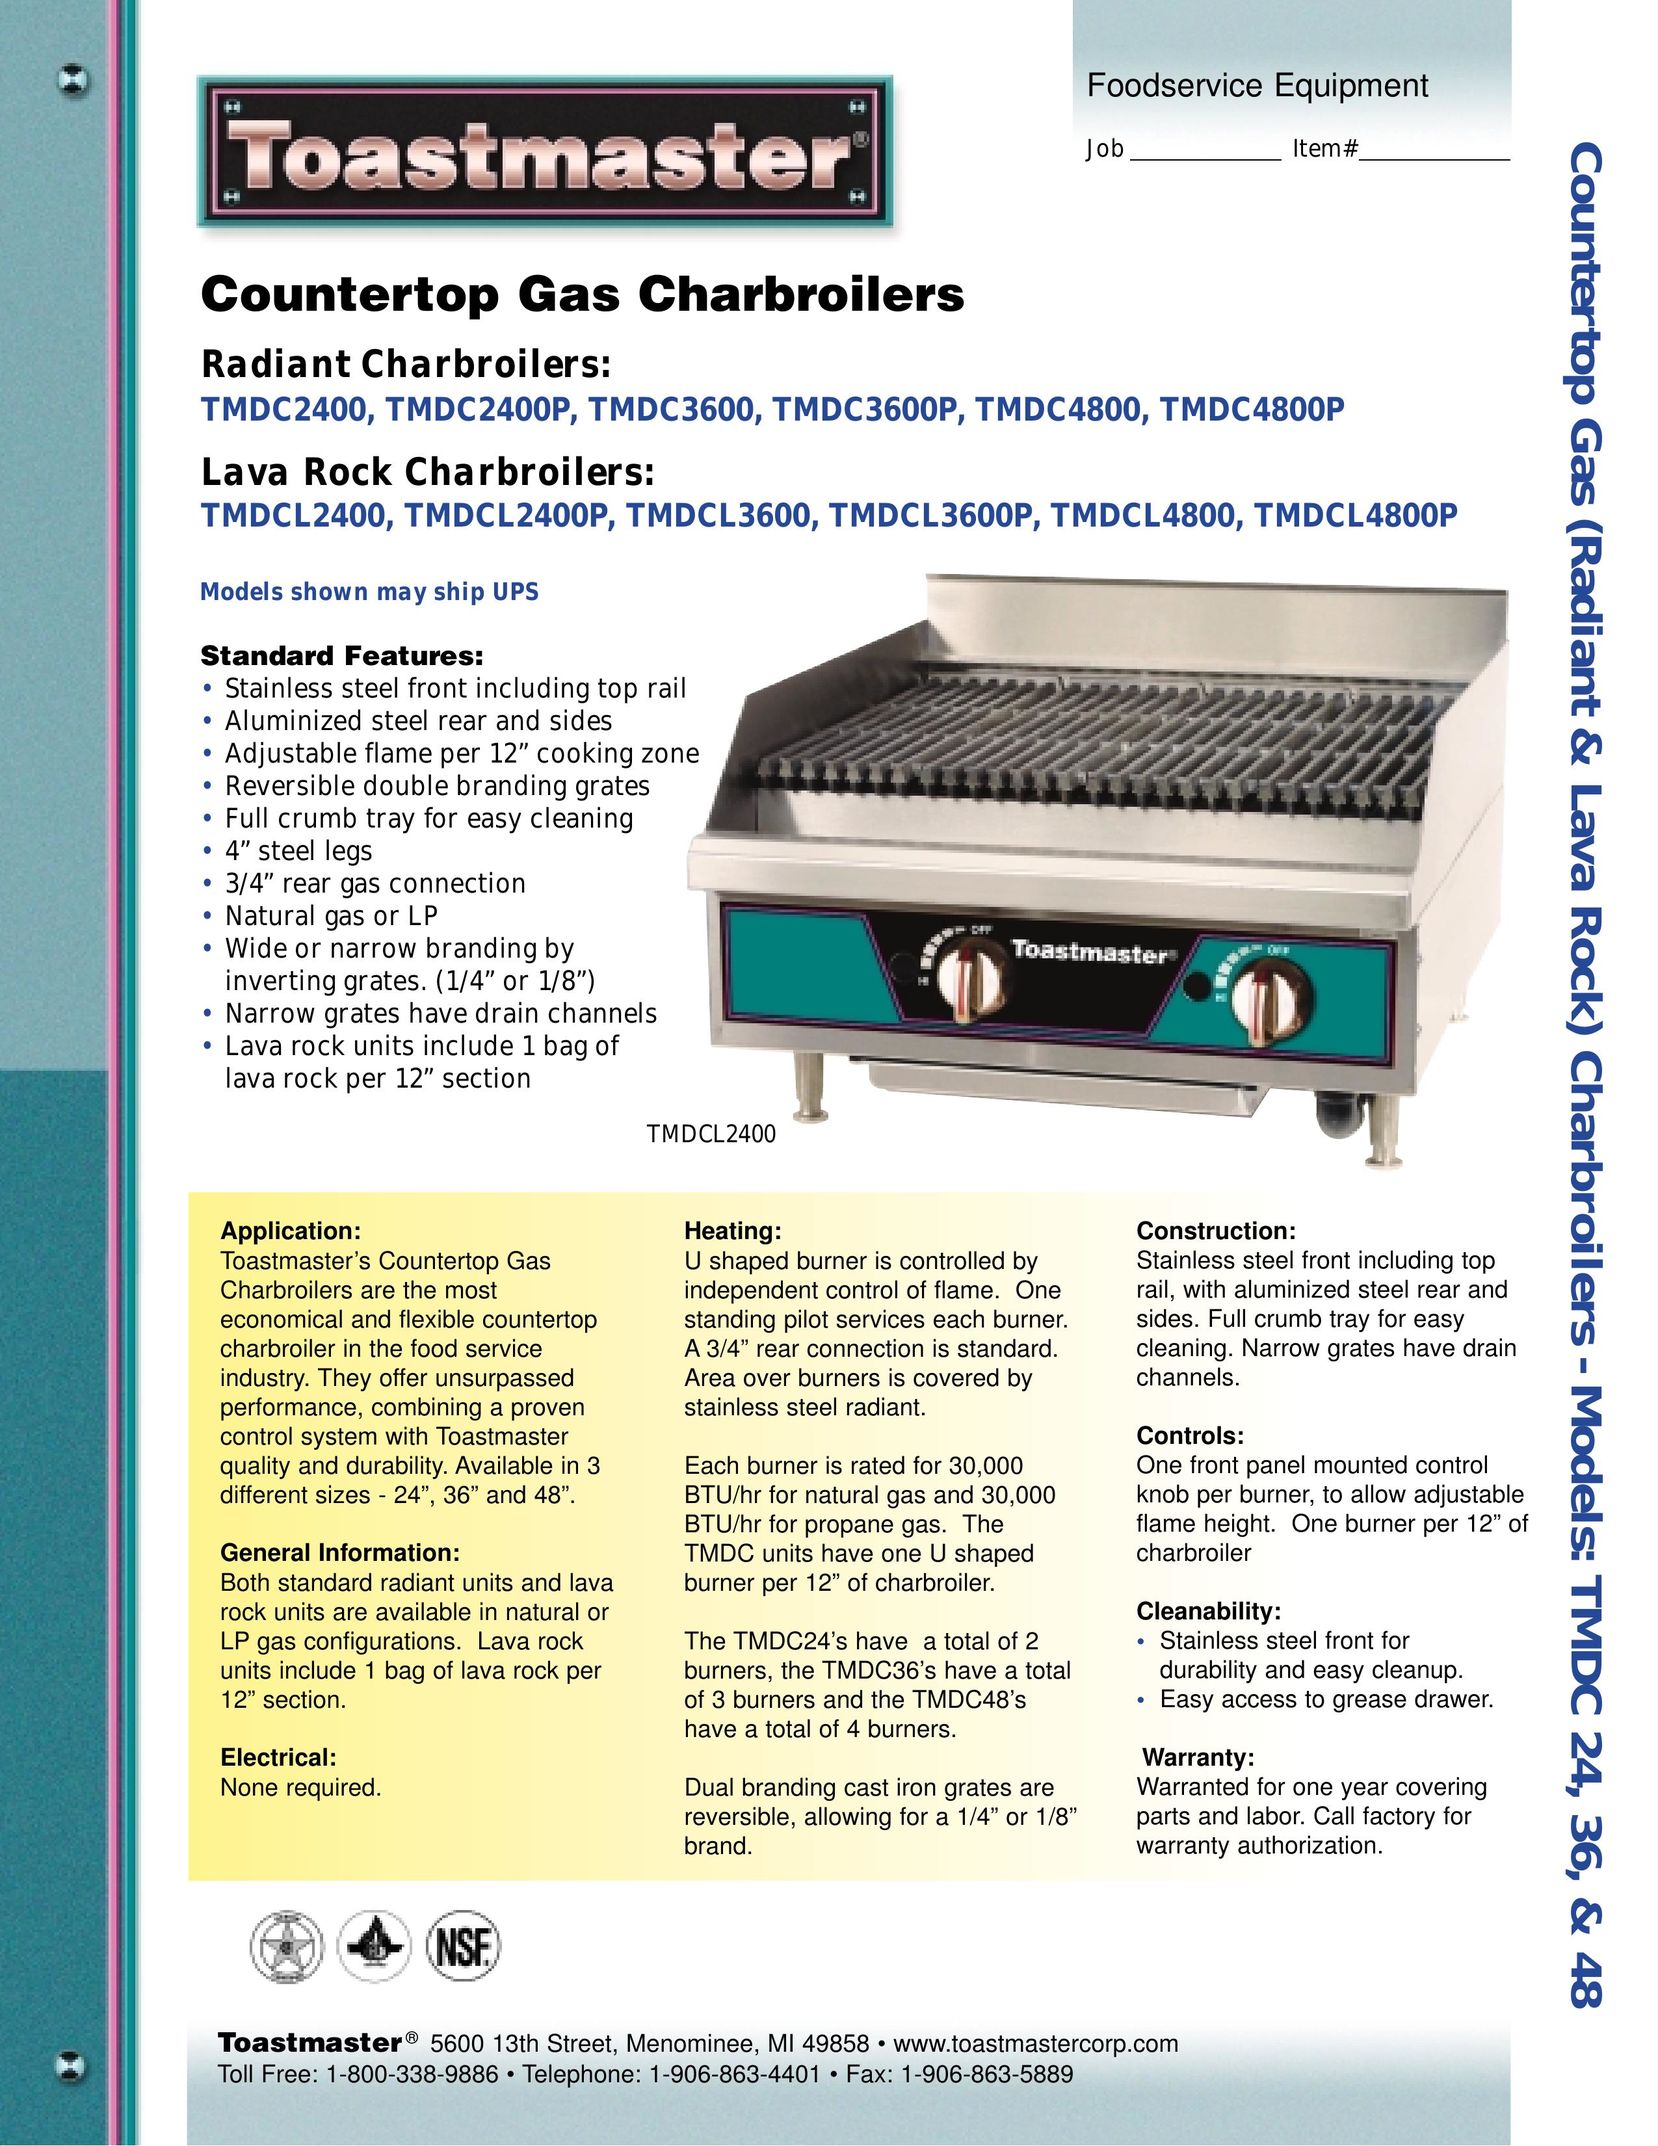 Toastmaster TMDCL3600P Oven User Manual